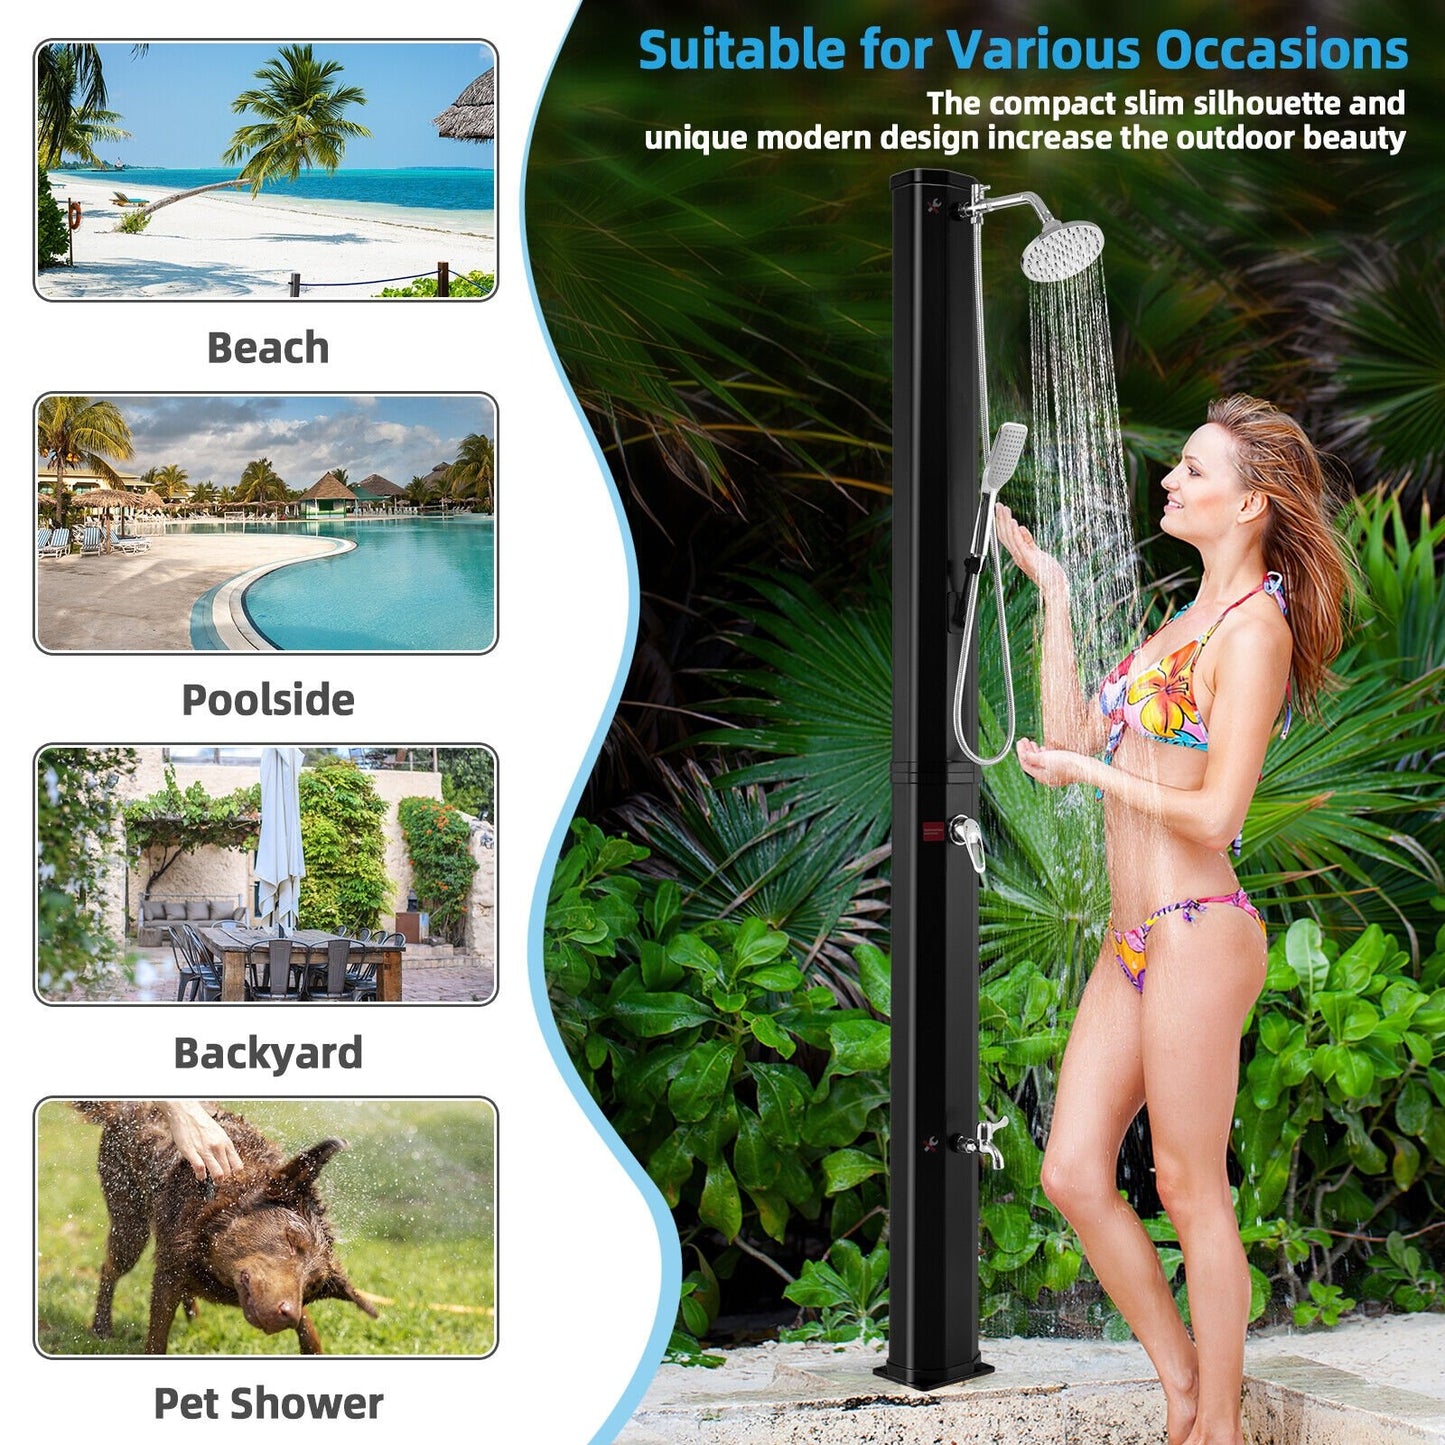 7.2 Feet 9.3 Gallon Solar Heated Shower with Hand and Foot Tap, Black at Gallery Canada